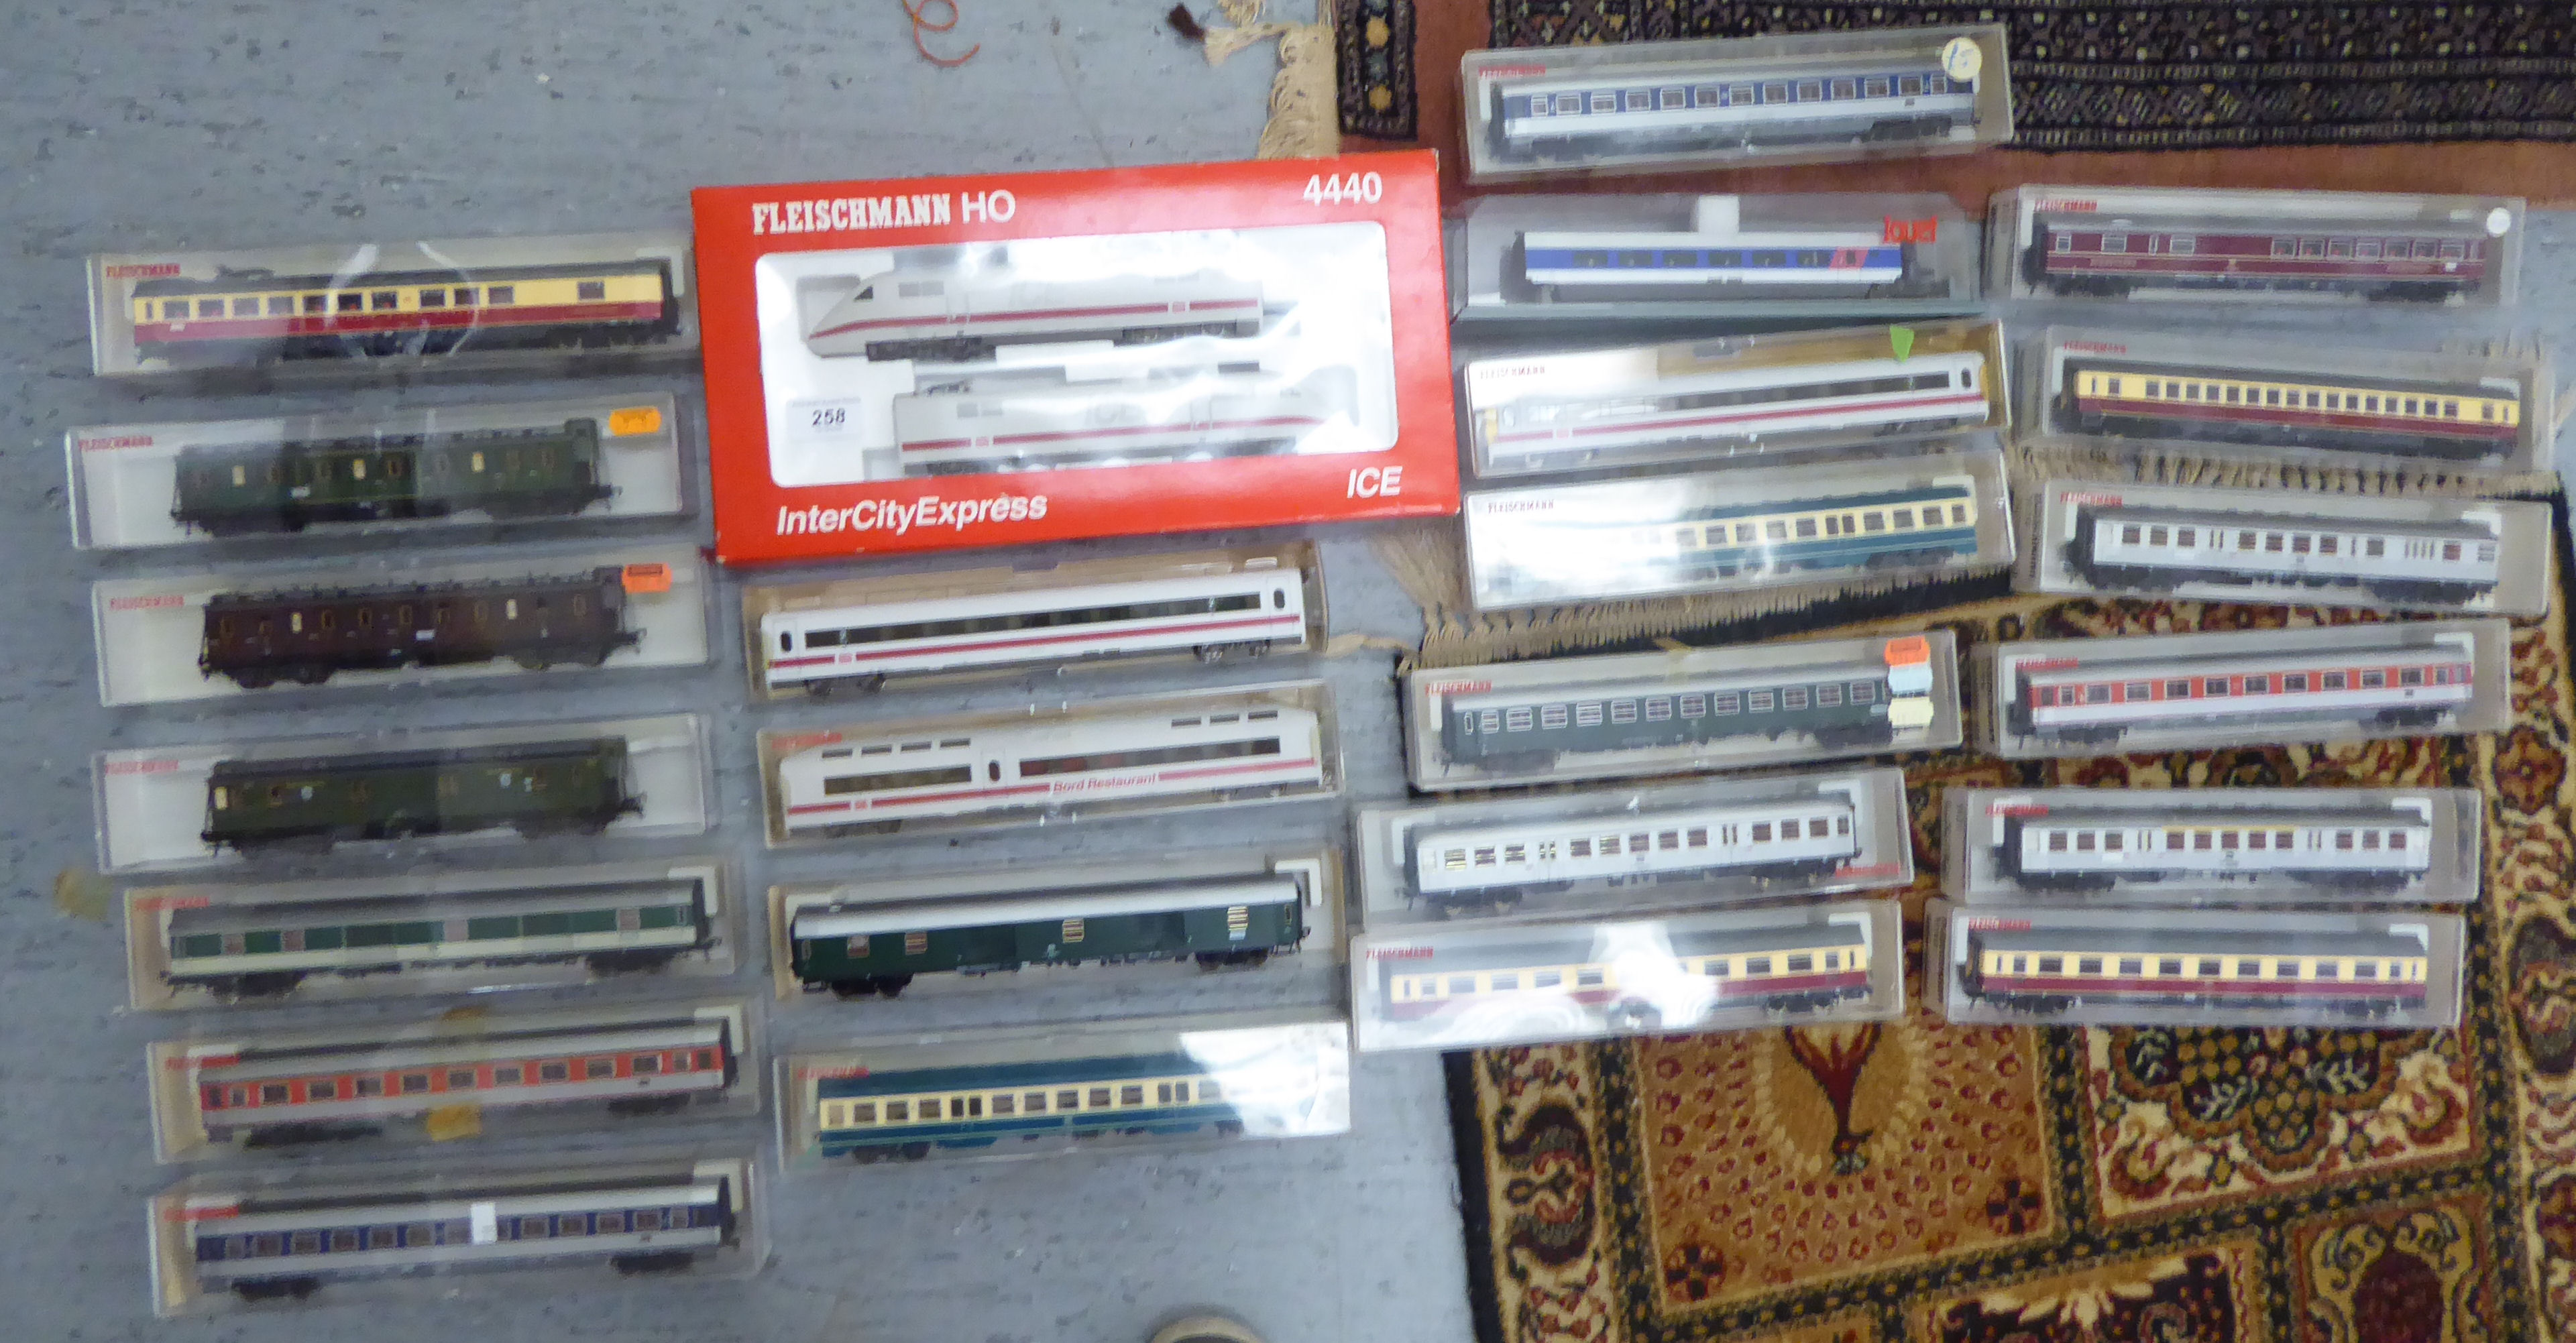 Fleischmann HO gauge model railway accessories: to include an Intercity Express and various coaches